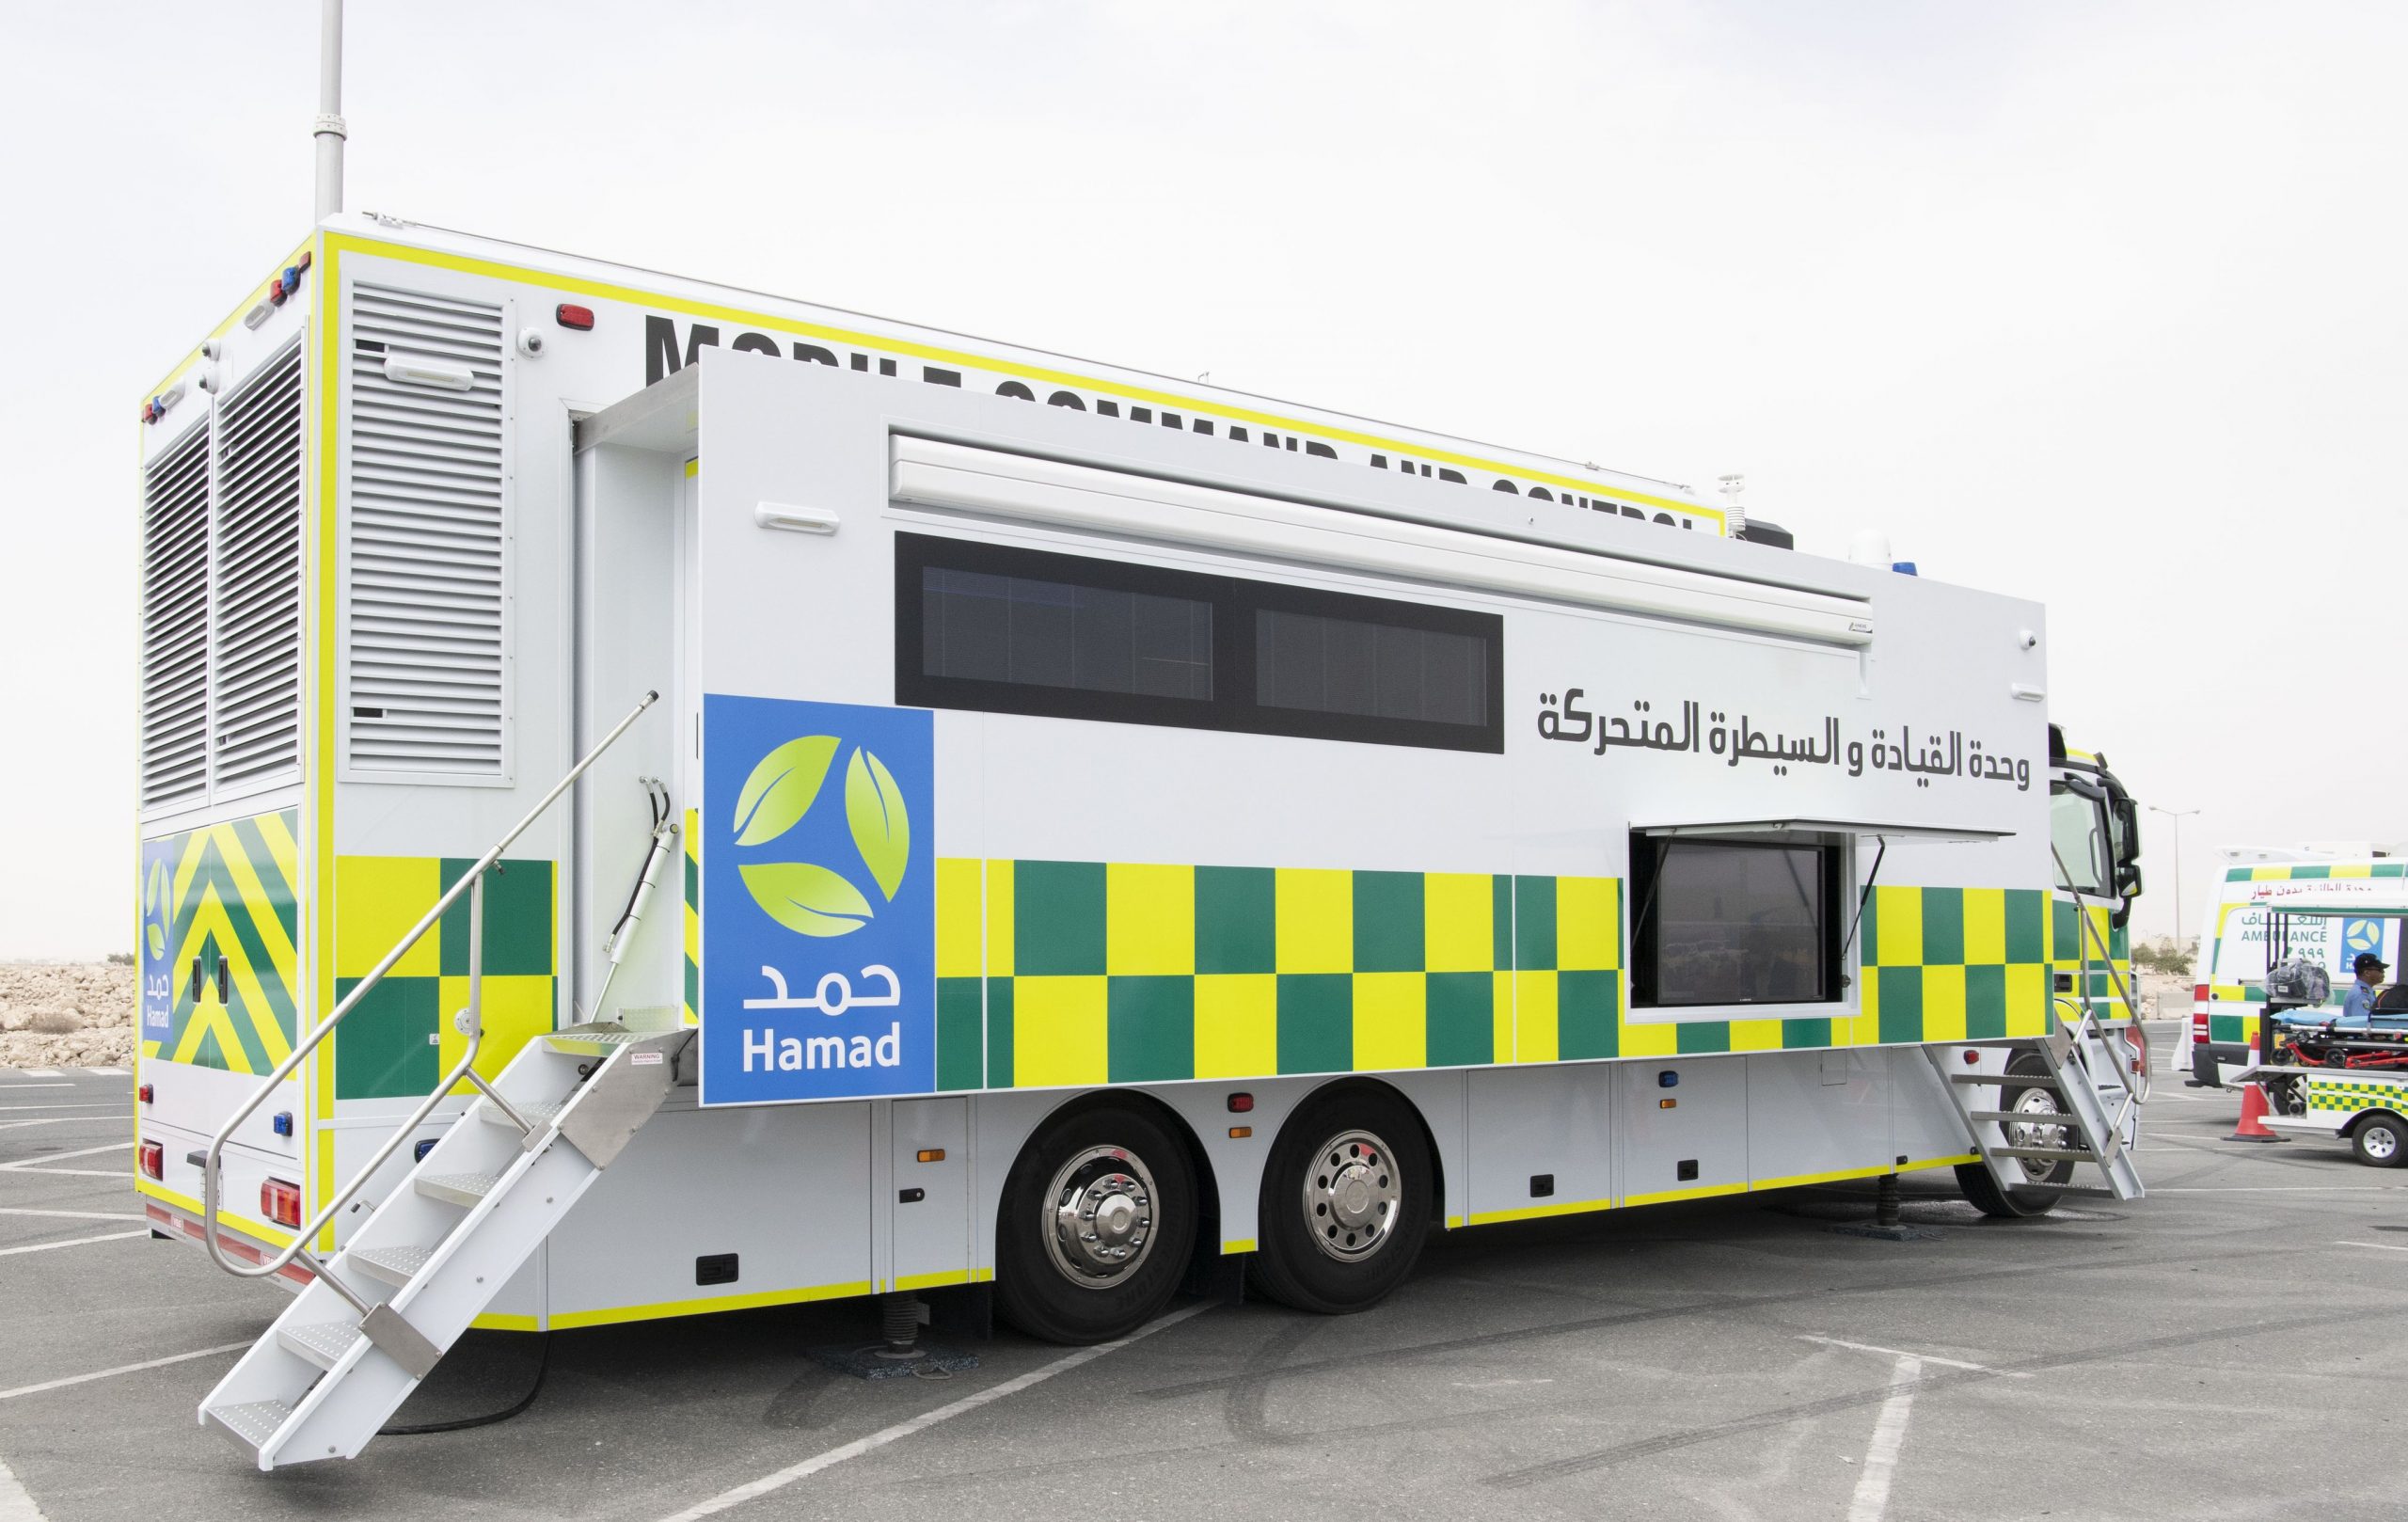 116 ambulances for the National Day events